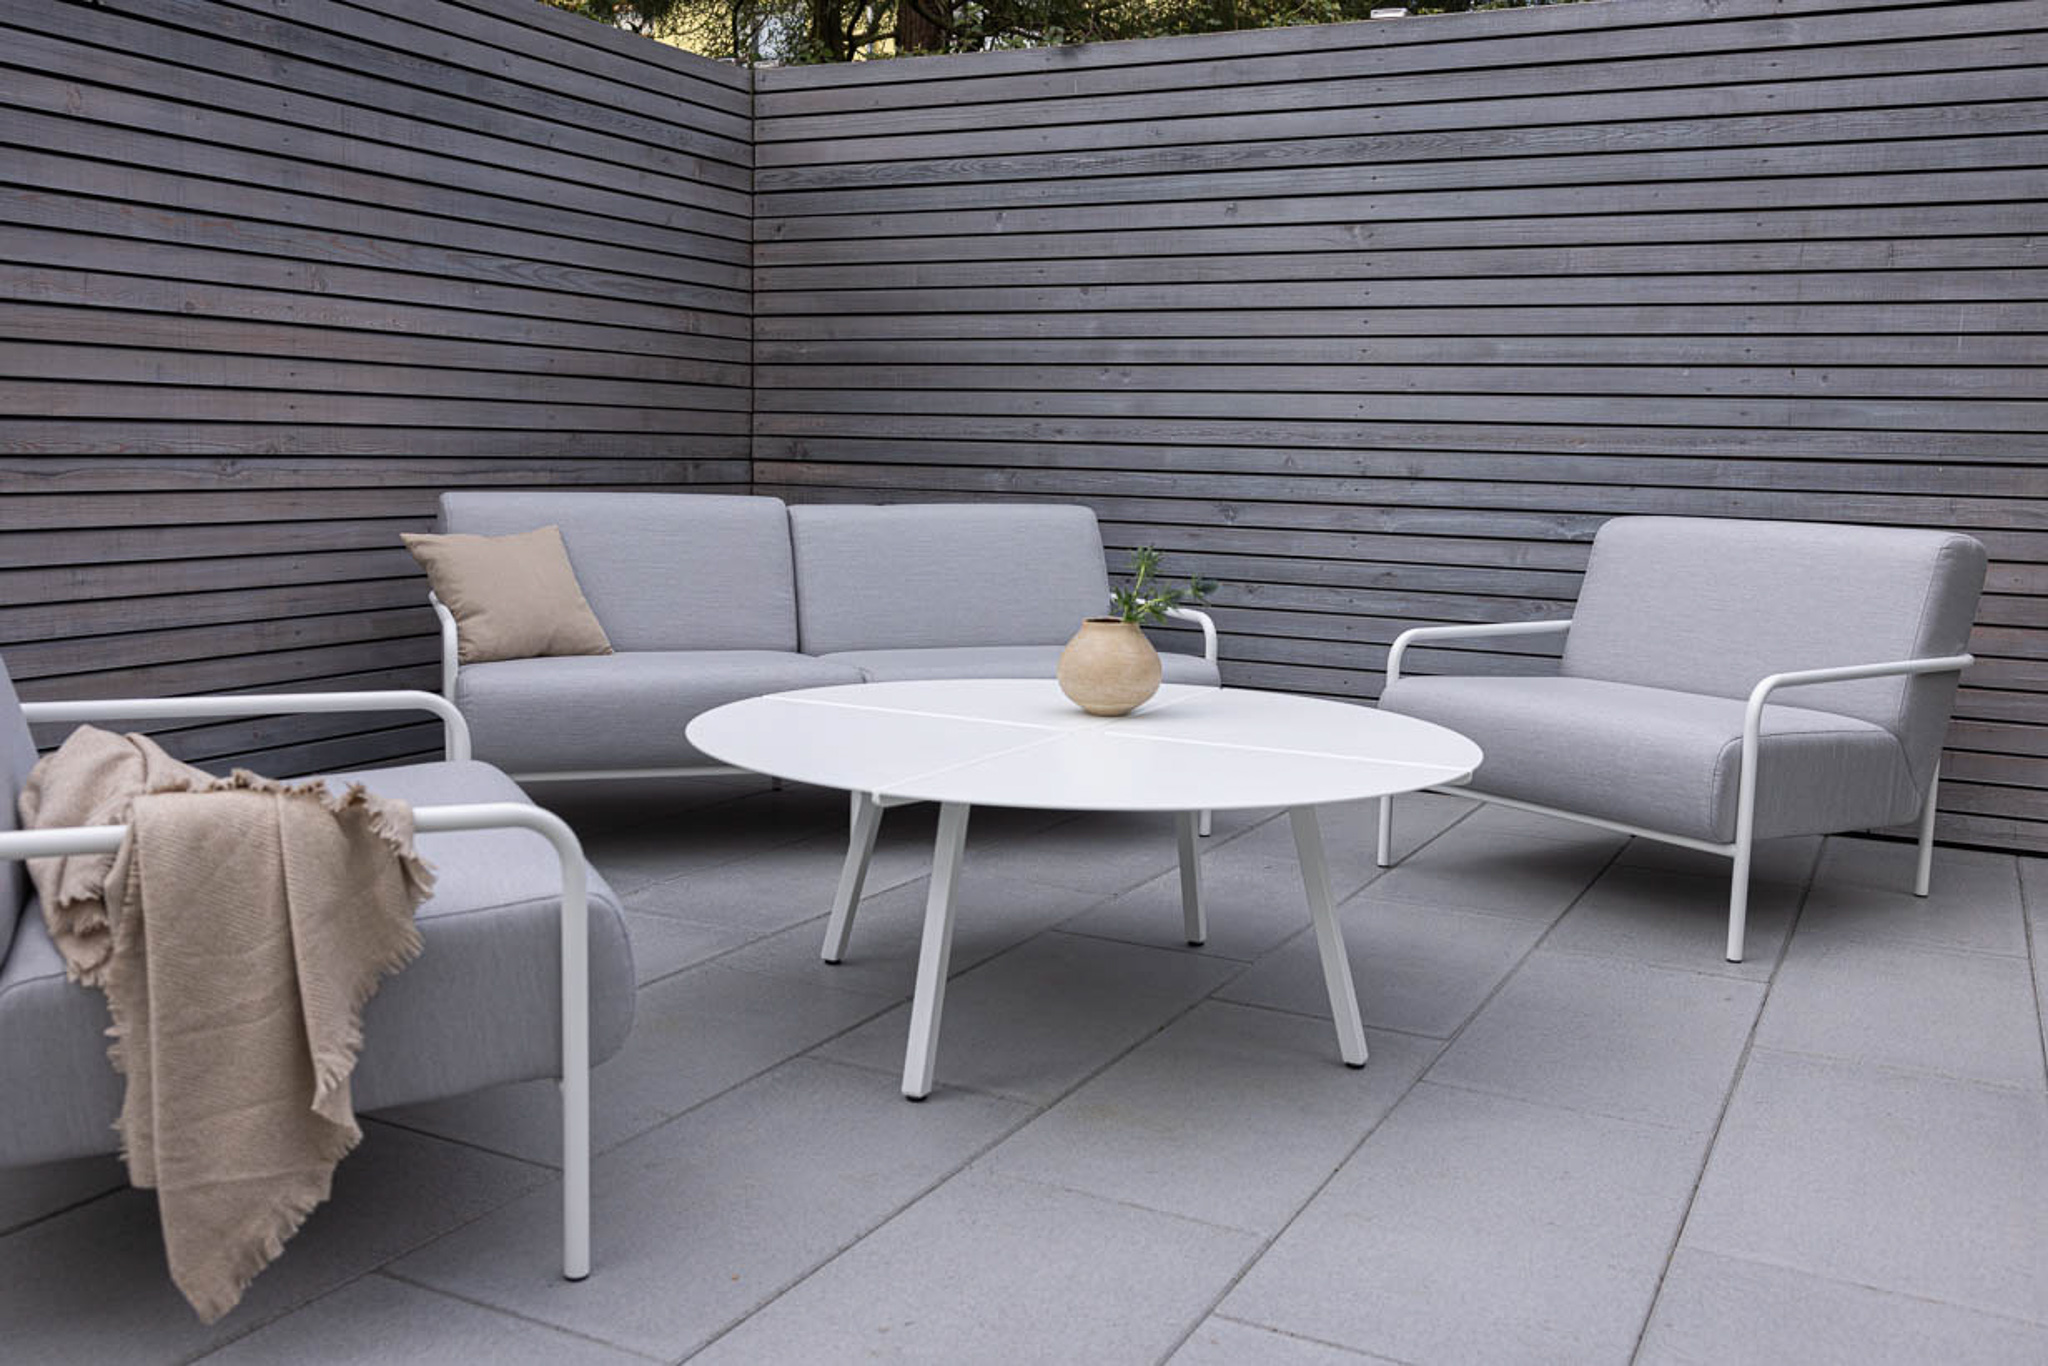 METALLBUDE // SOLEA - OUTDOOR LOUNGE CHAIR | WHITE - LIGHT GRAY CUSHION